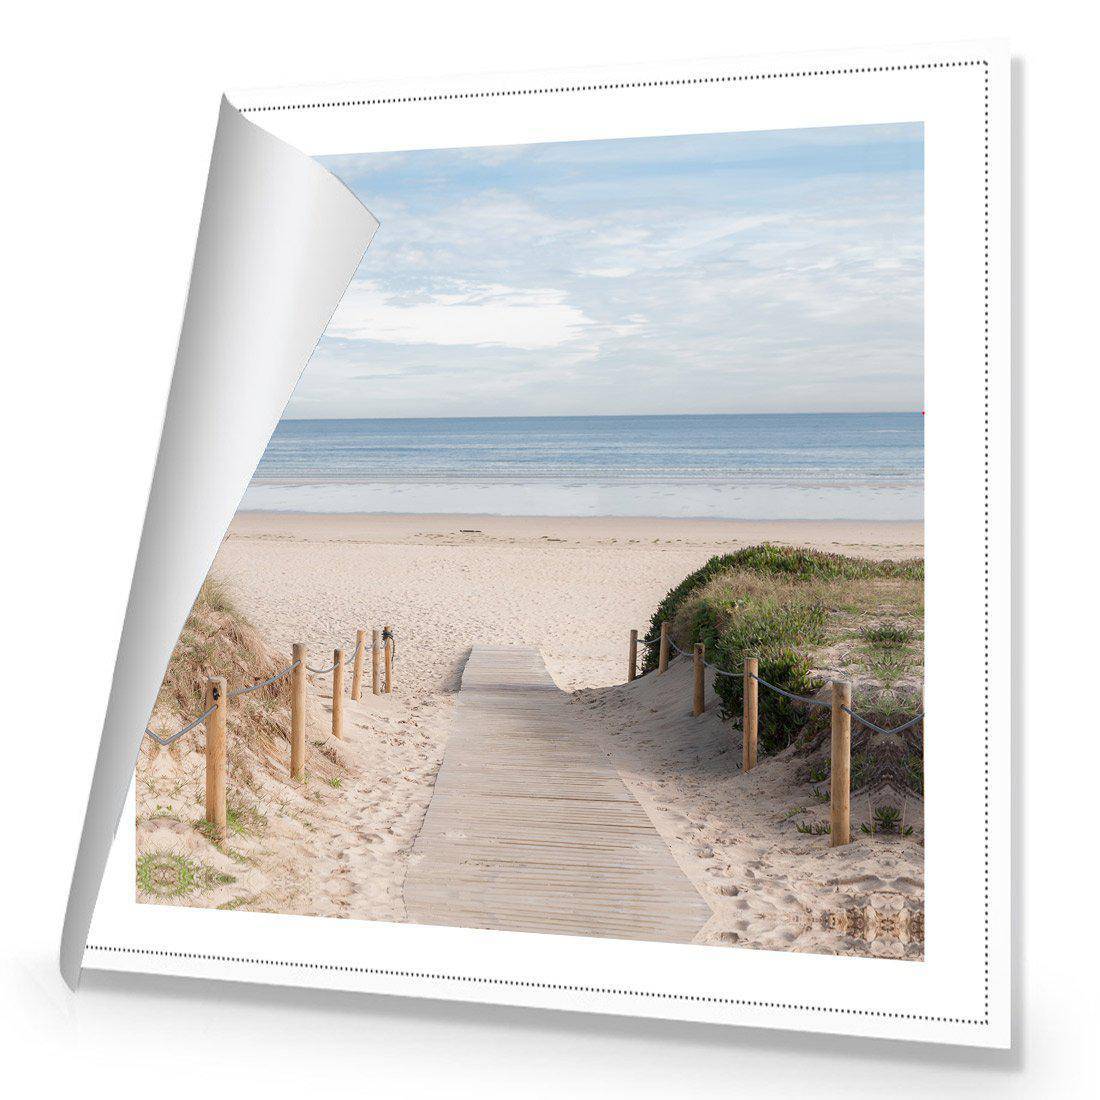 Pathway To The Sea Canvas Art-Canvas-Wall Art Designs-30x30cm-Rolled Canvas-Wall Art Designs